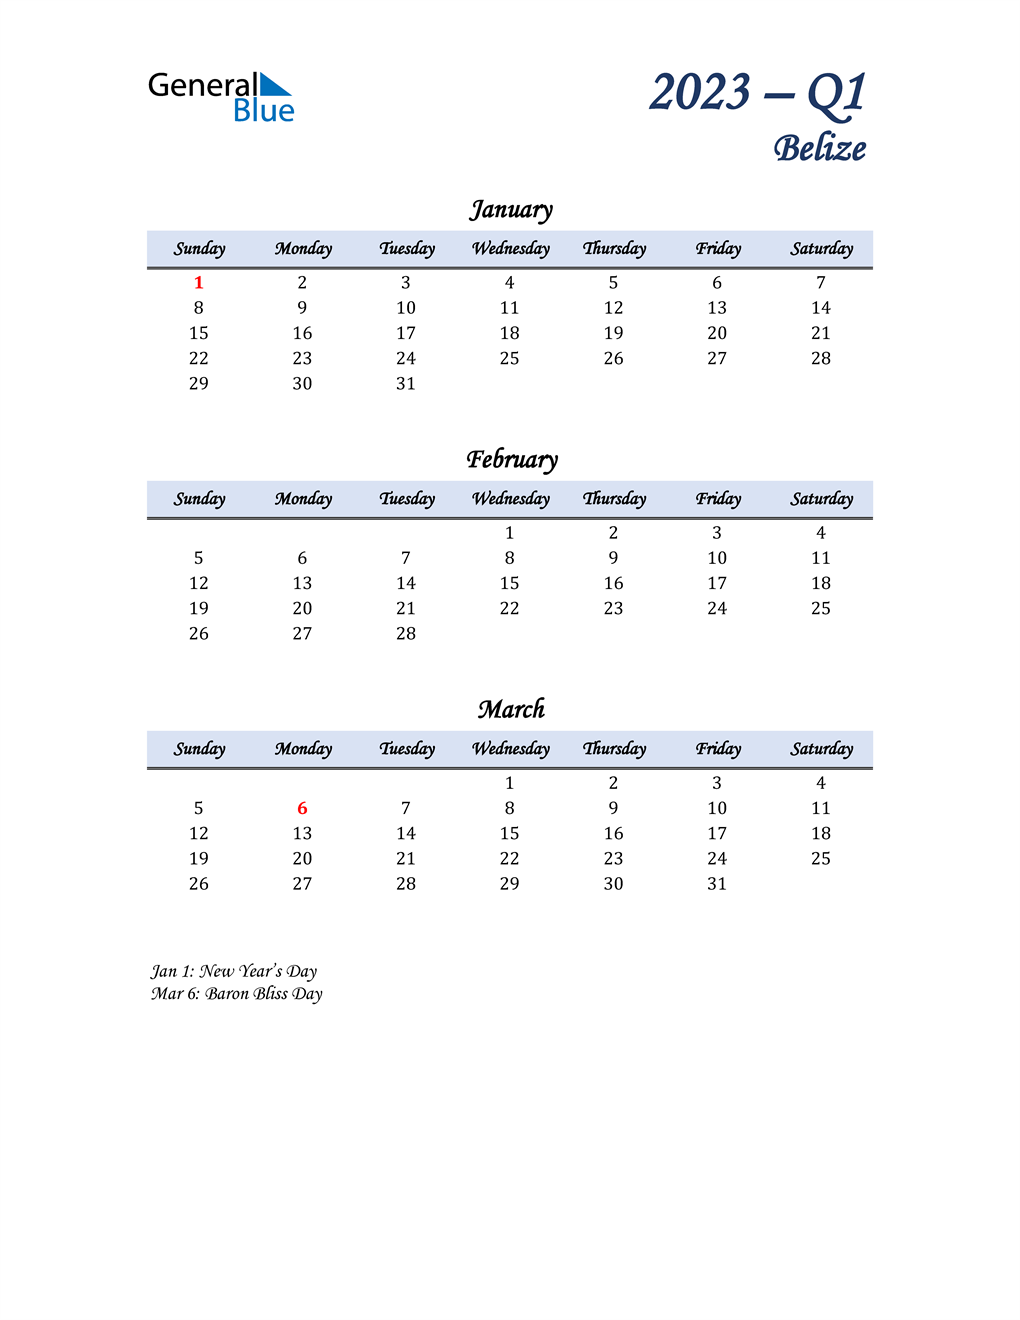  January, February, and March Calendar for Belize